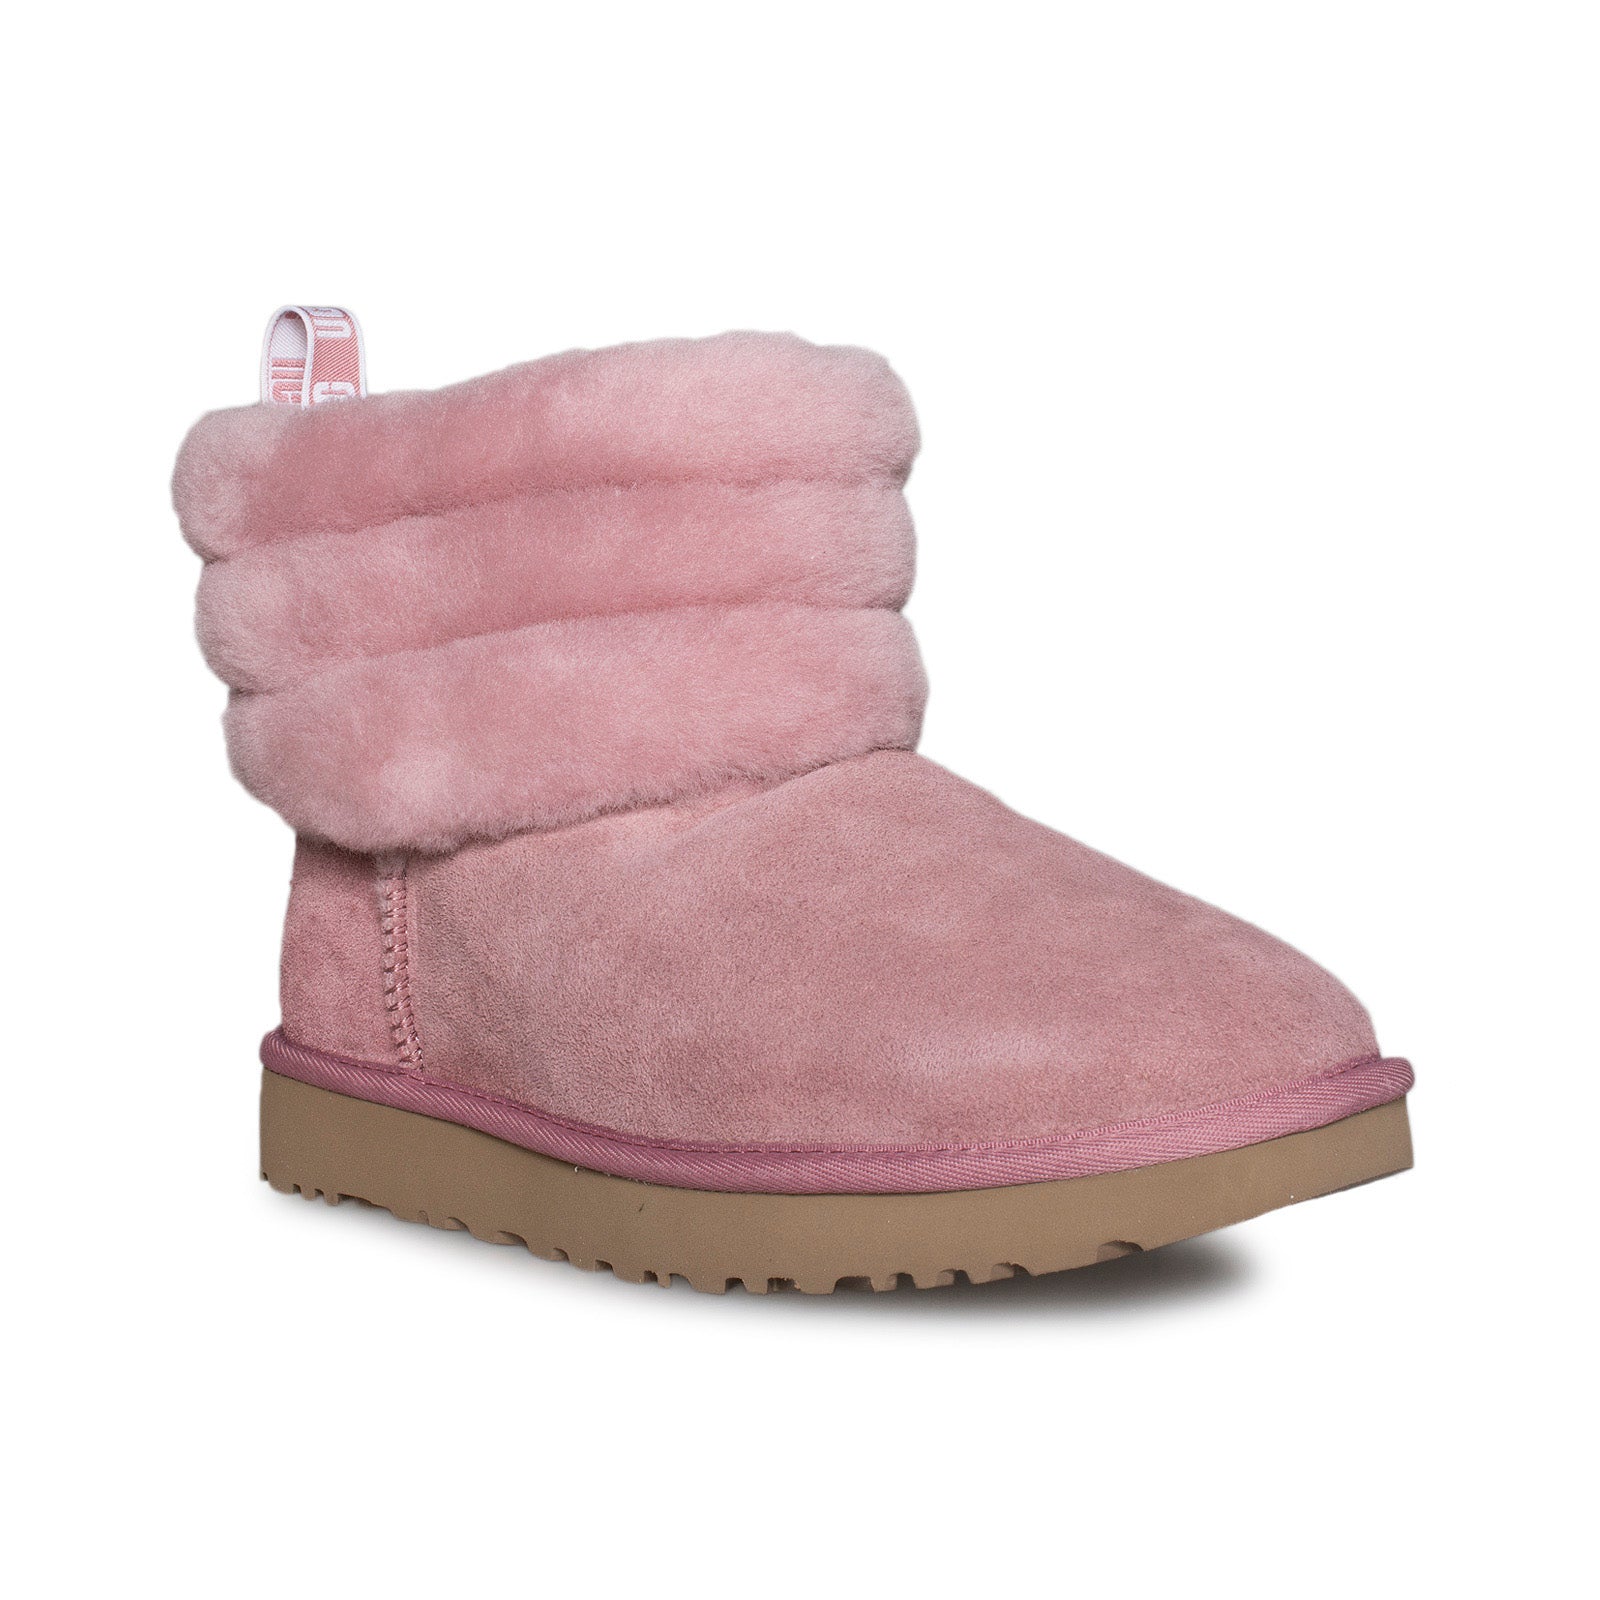 UGG Fluff Mini Quilted Pink Dawn Boots - Women's - MyCozyBoots